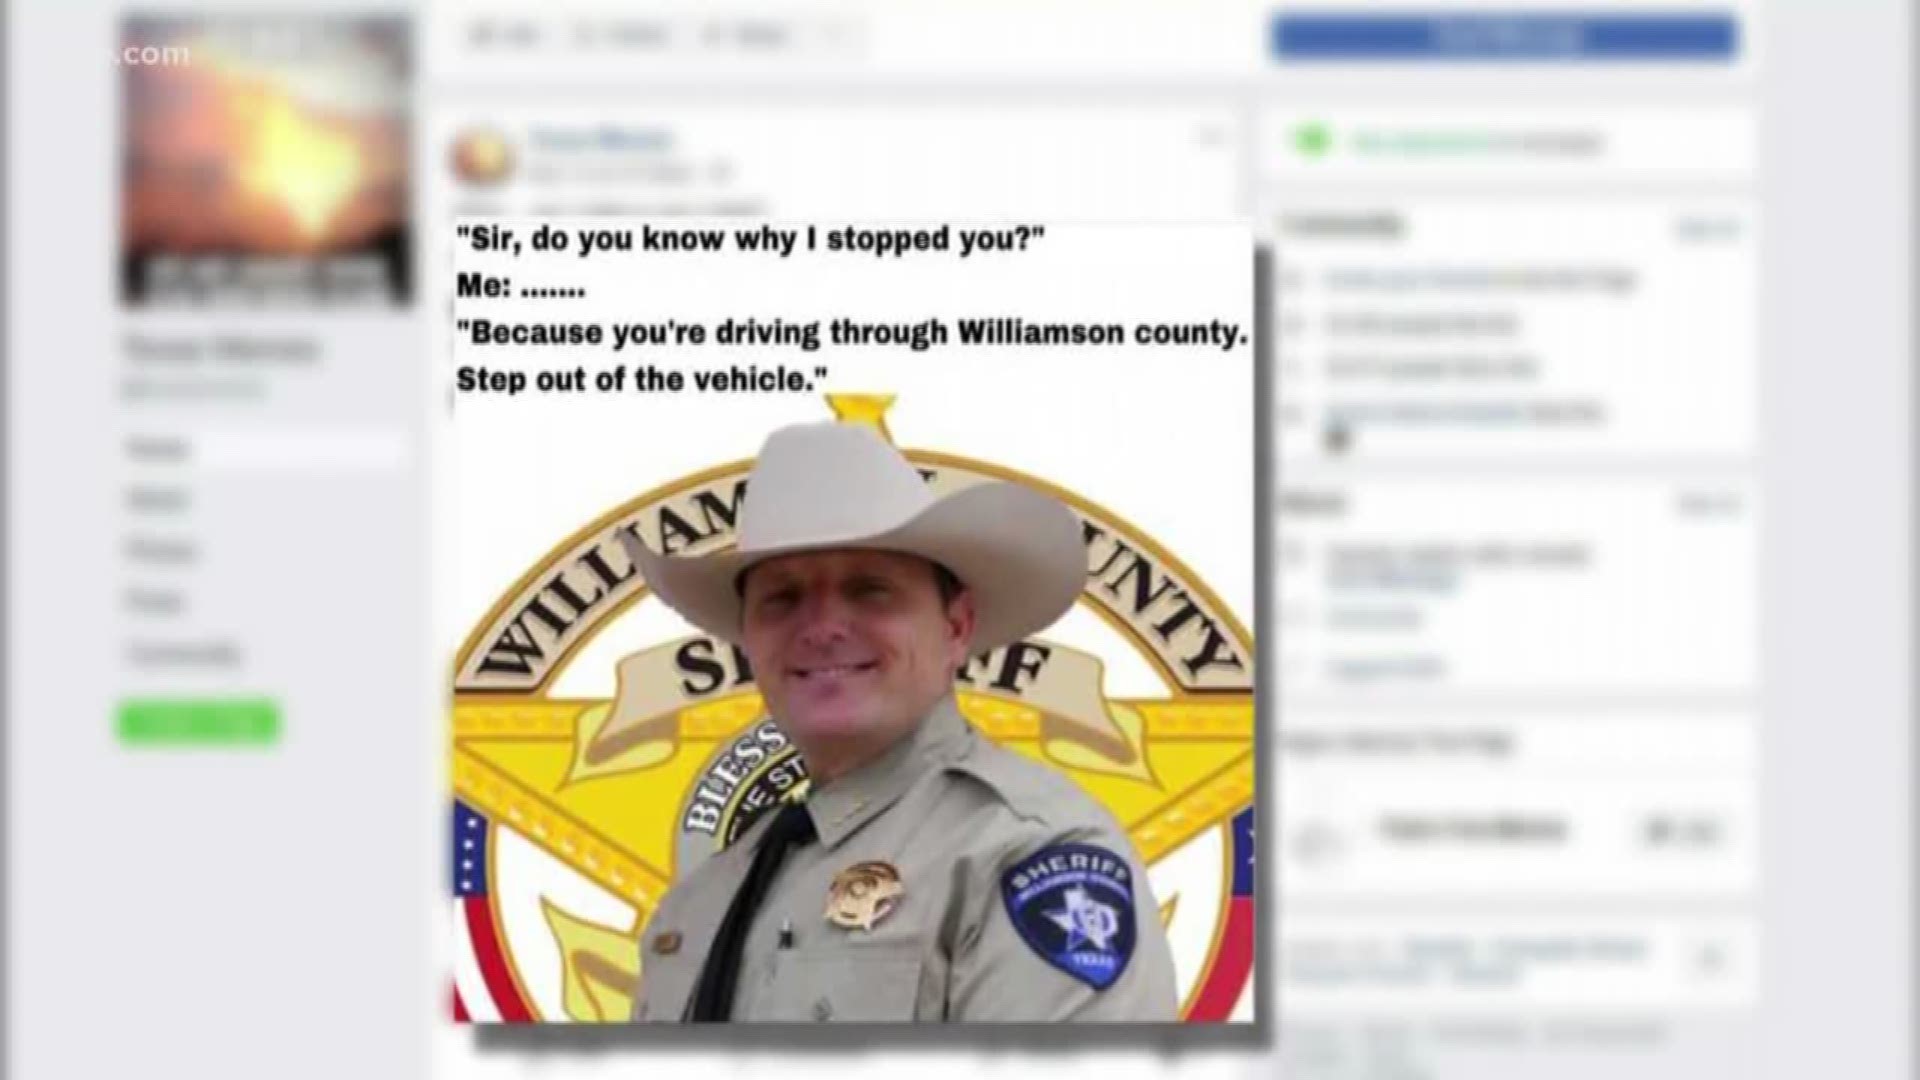 A meme posted on Facebook taking a jab at Williamson County's reputation garnered a response from the sheriff himself.